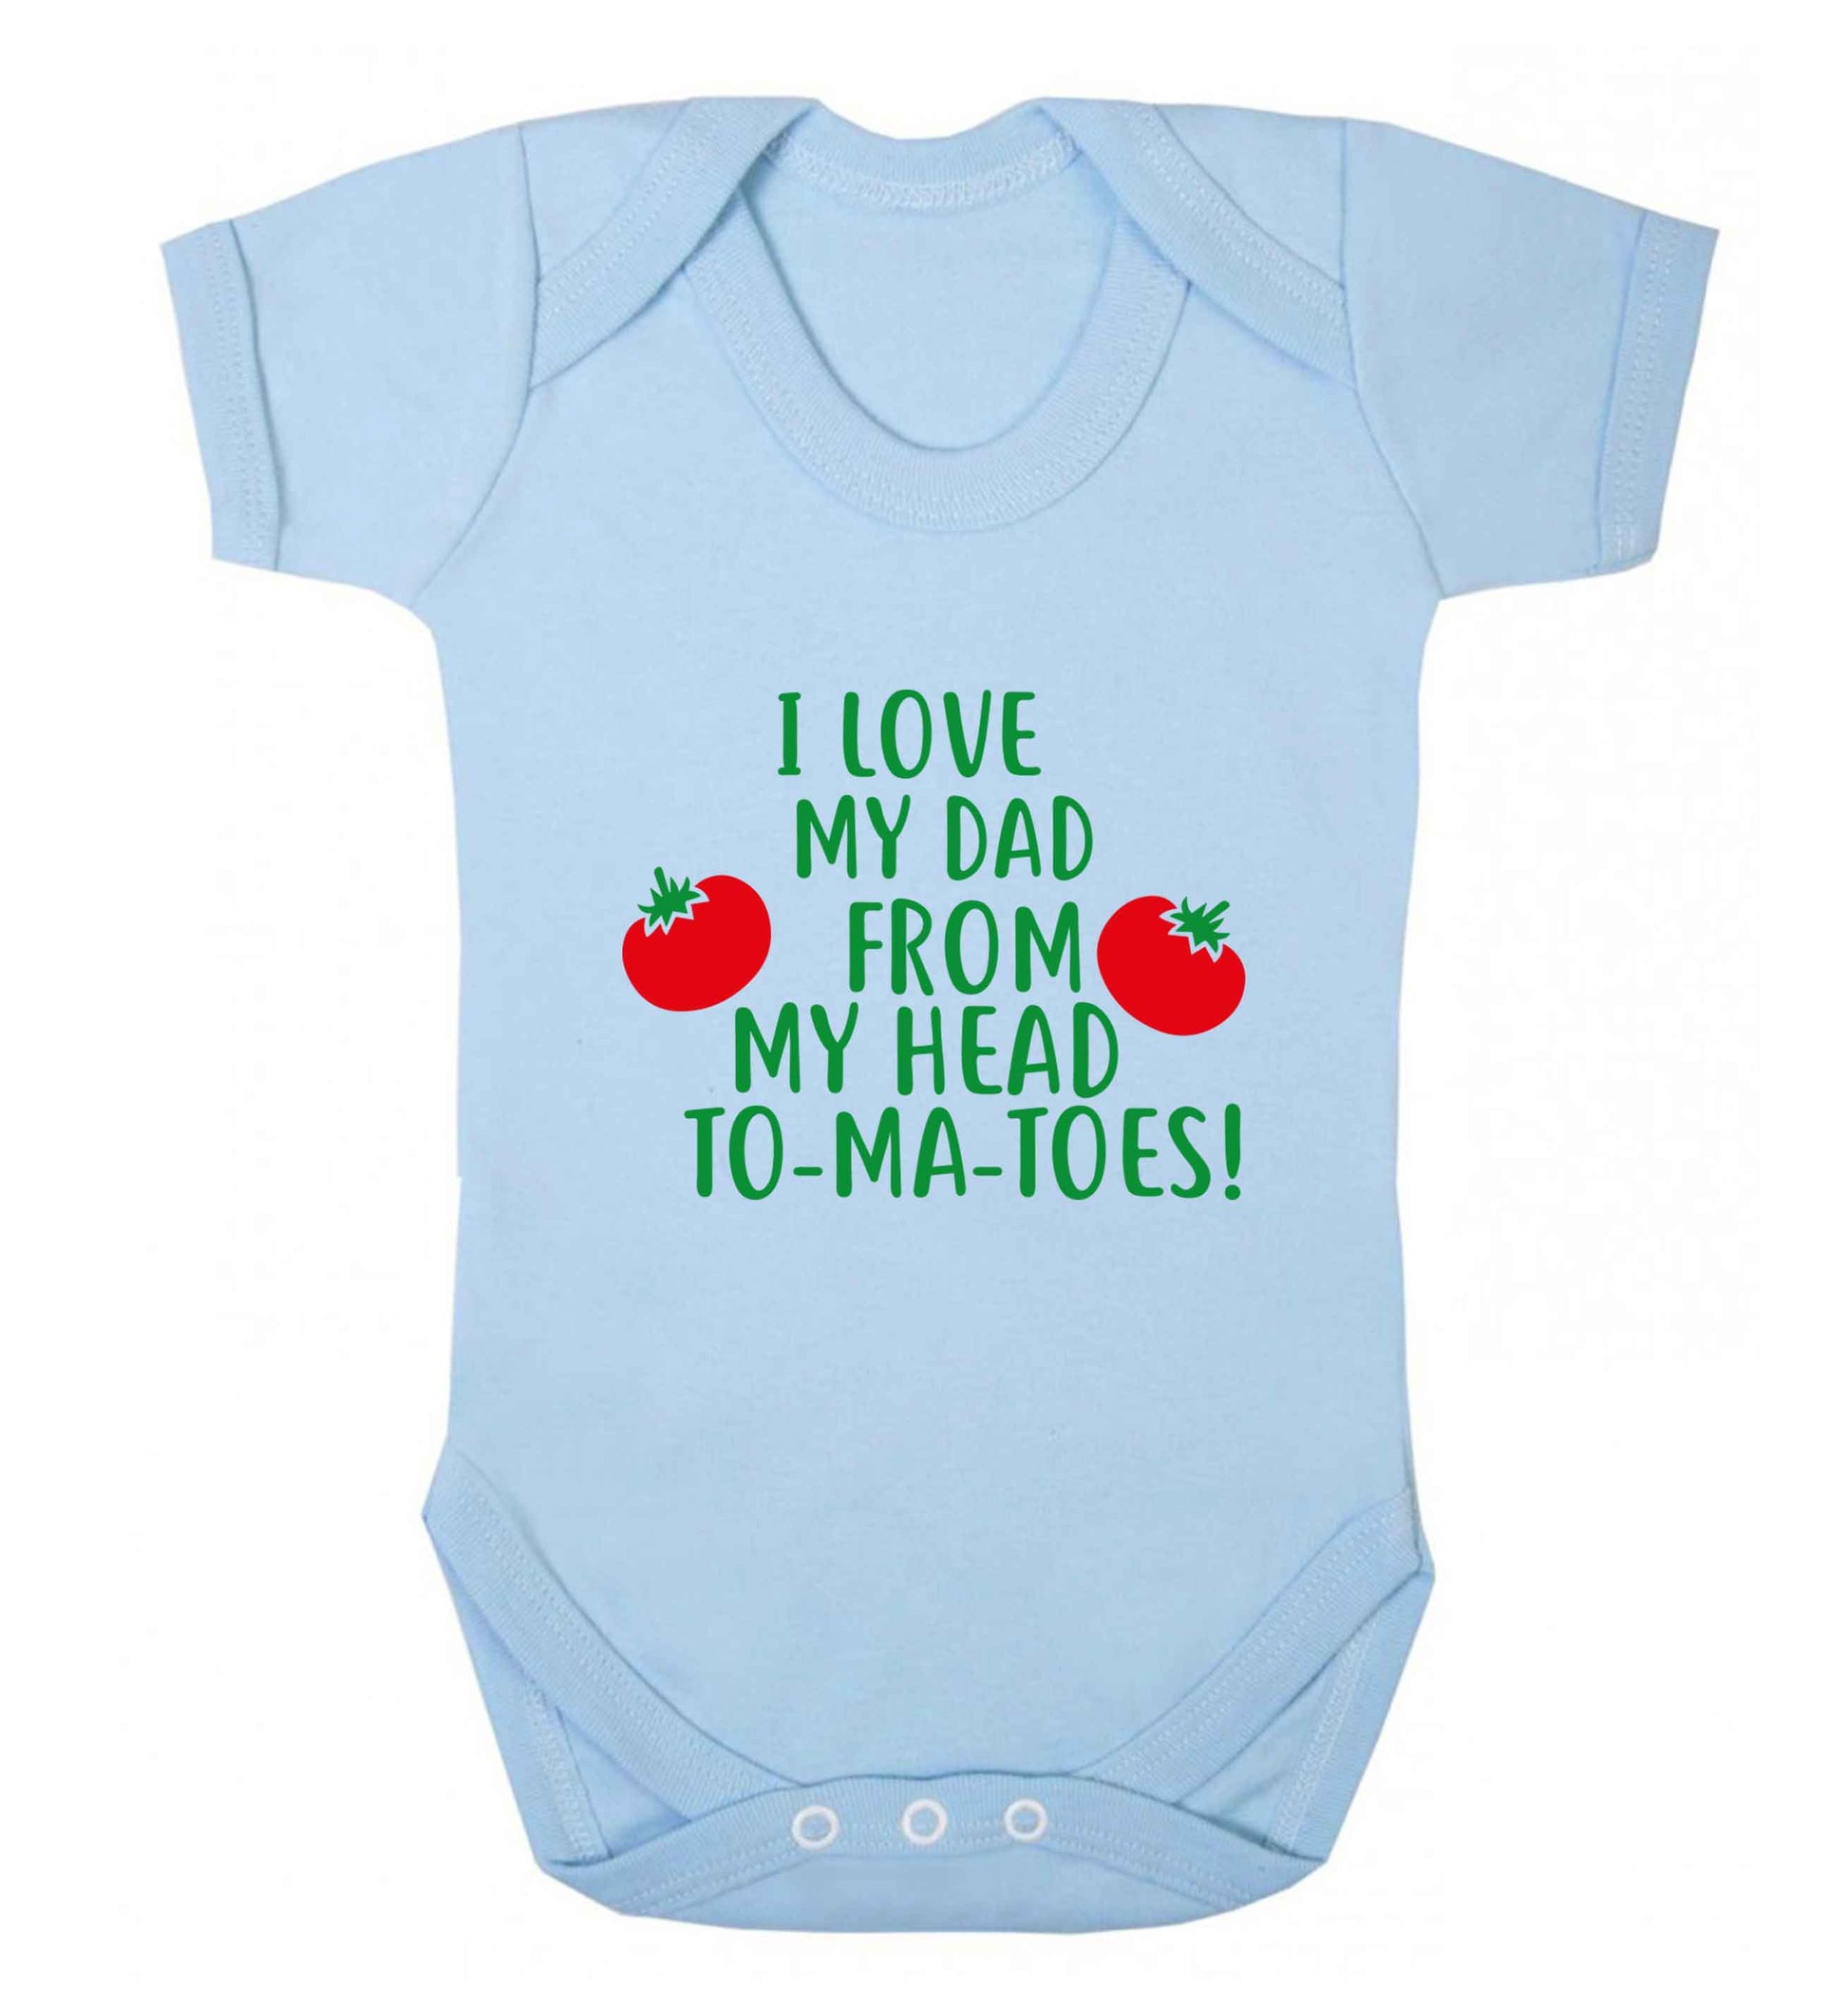 I love my dad from my head to-ma-toes baby vest pale blue 18-24 months